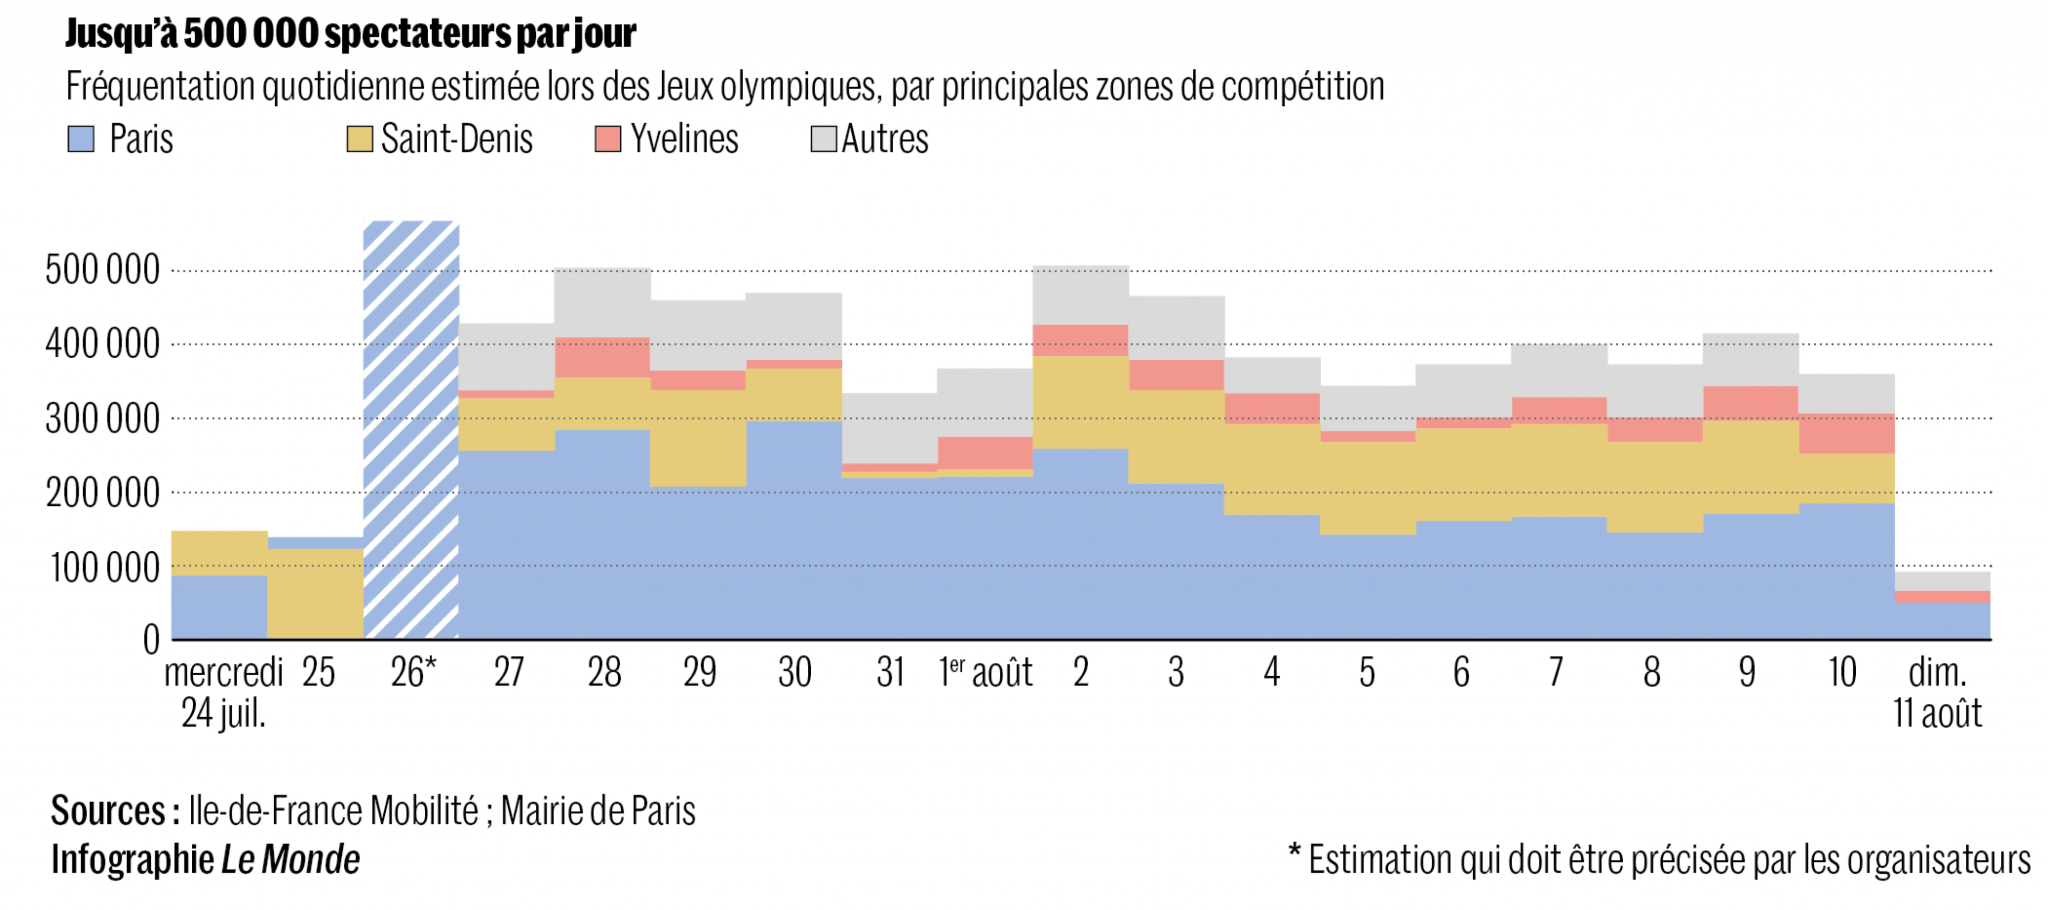 Approximately 500,000 spectators are expected on each day of the Paris 2024 Olympic Games ©IDFM/Le Monde